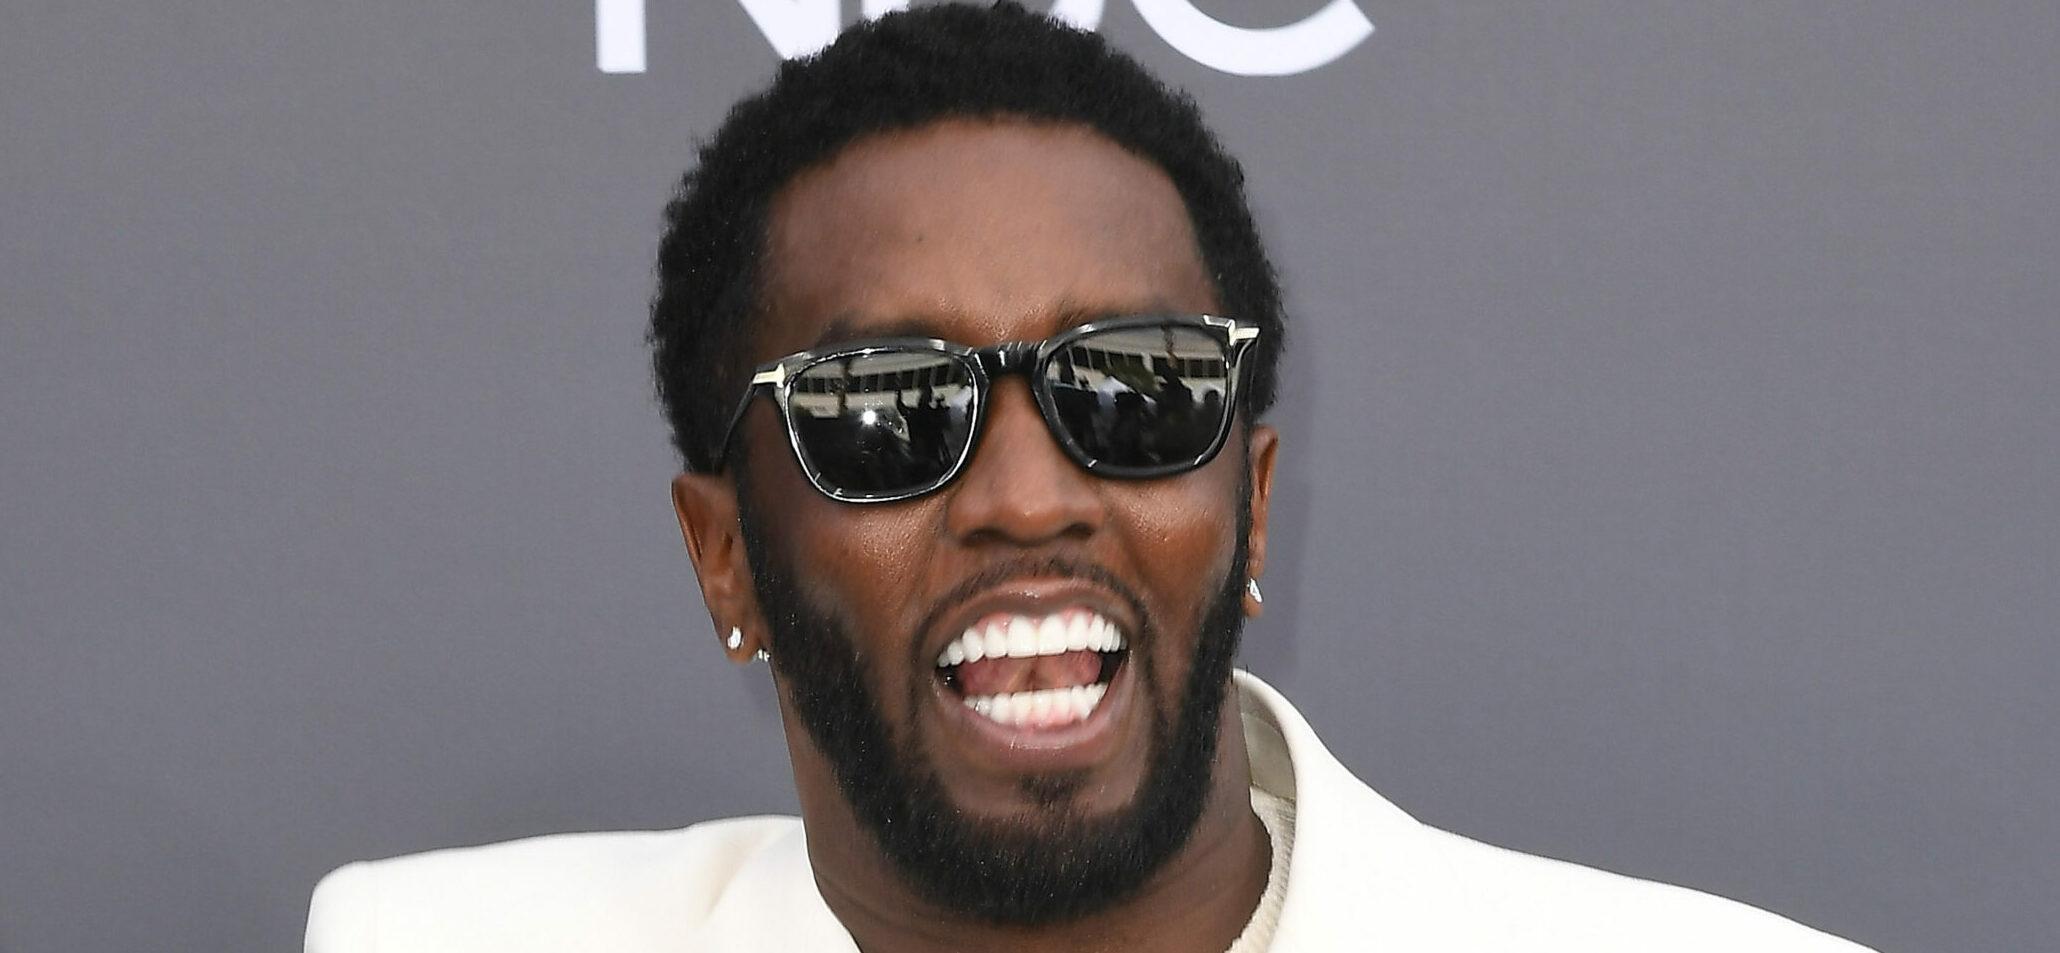 Diddy Enjoys Daddy Duties In THIS Cute Photo With Newborn Baby